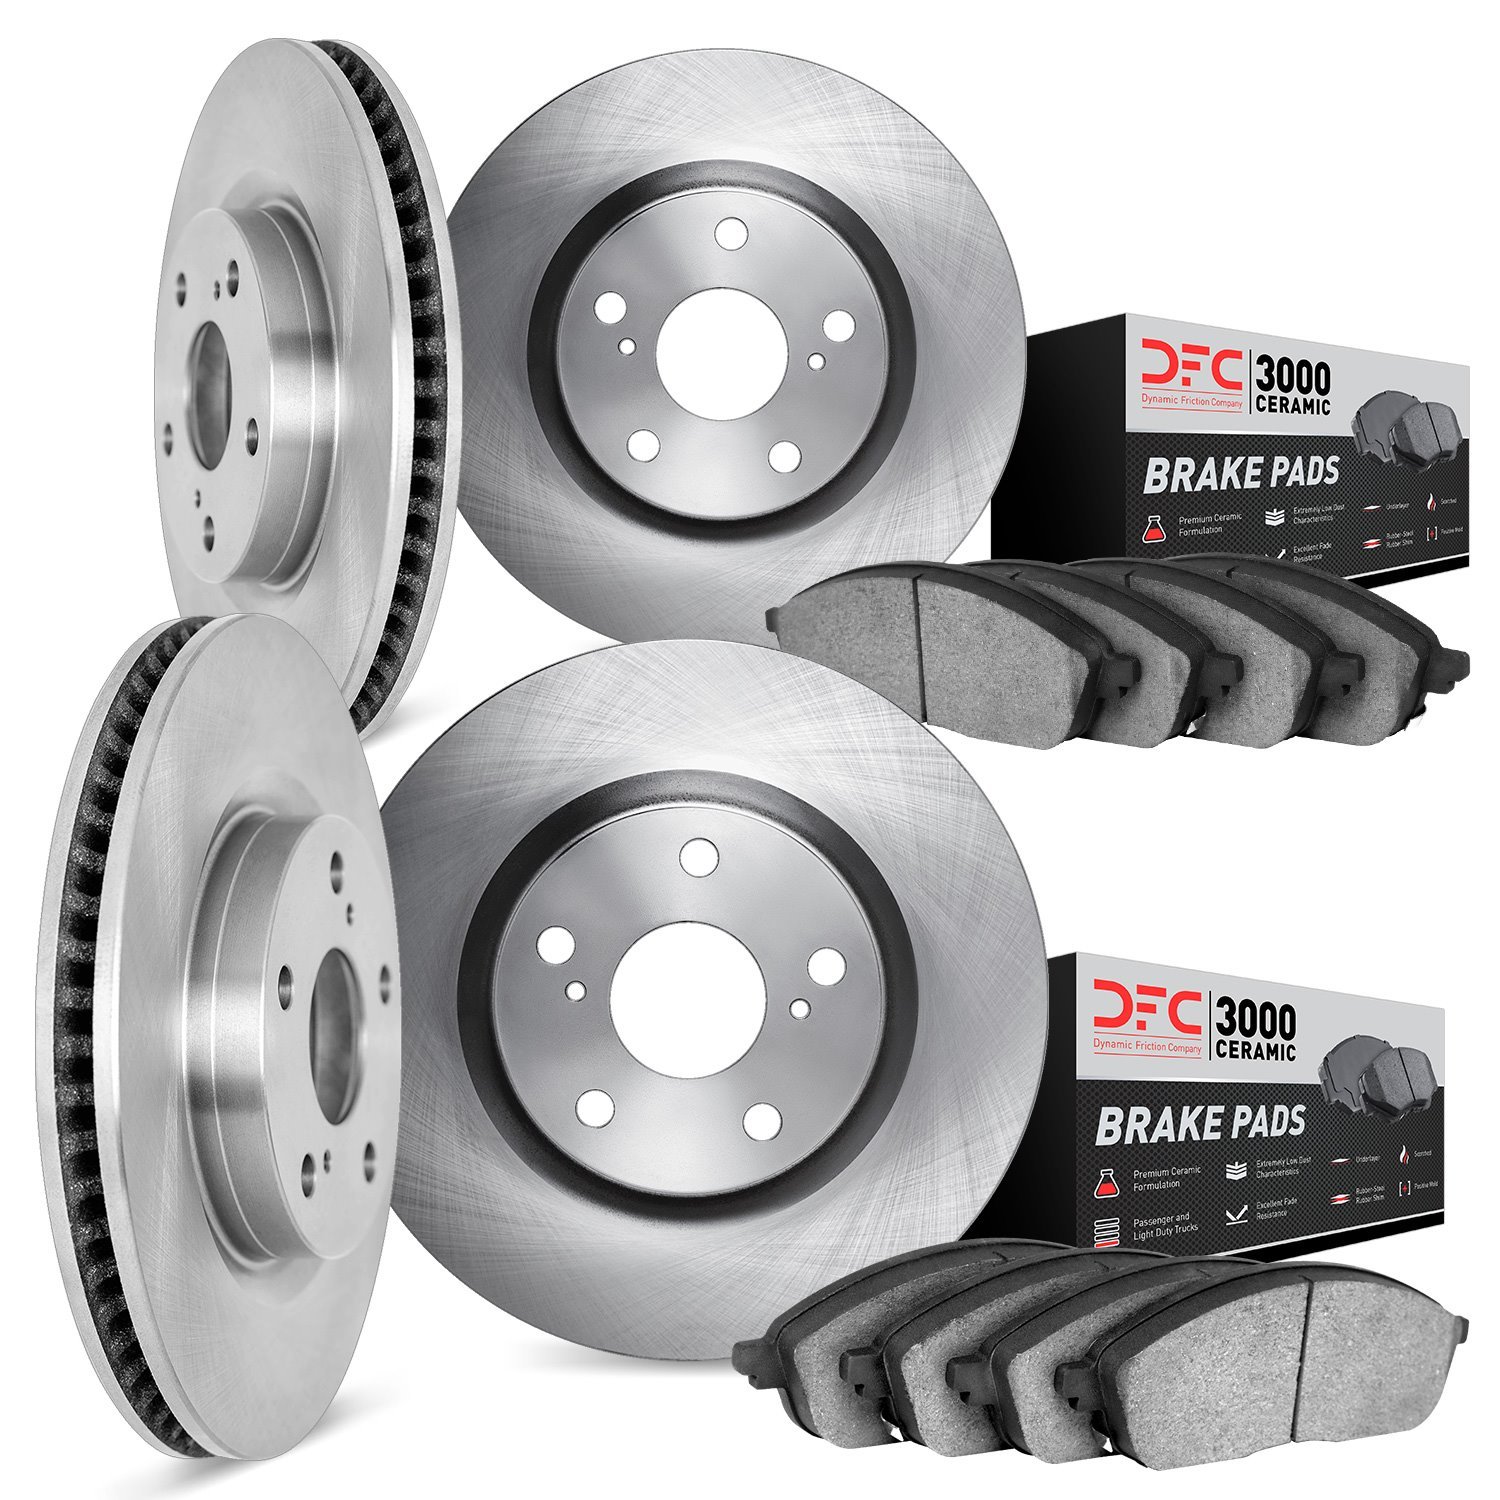 6304-02002 Brake Rotors with 3000-Series Ceramic Brake Pads Kit, 1977-1988 Porsche, Position: Front and Rear